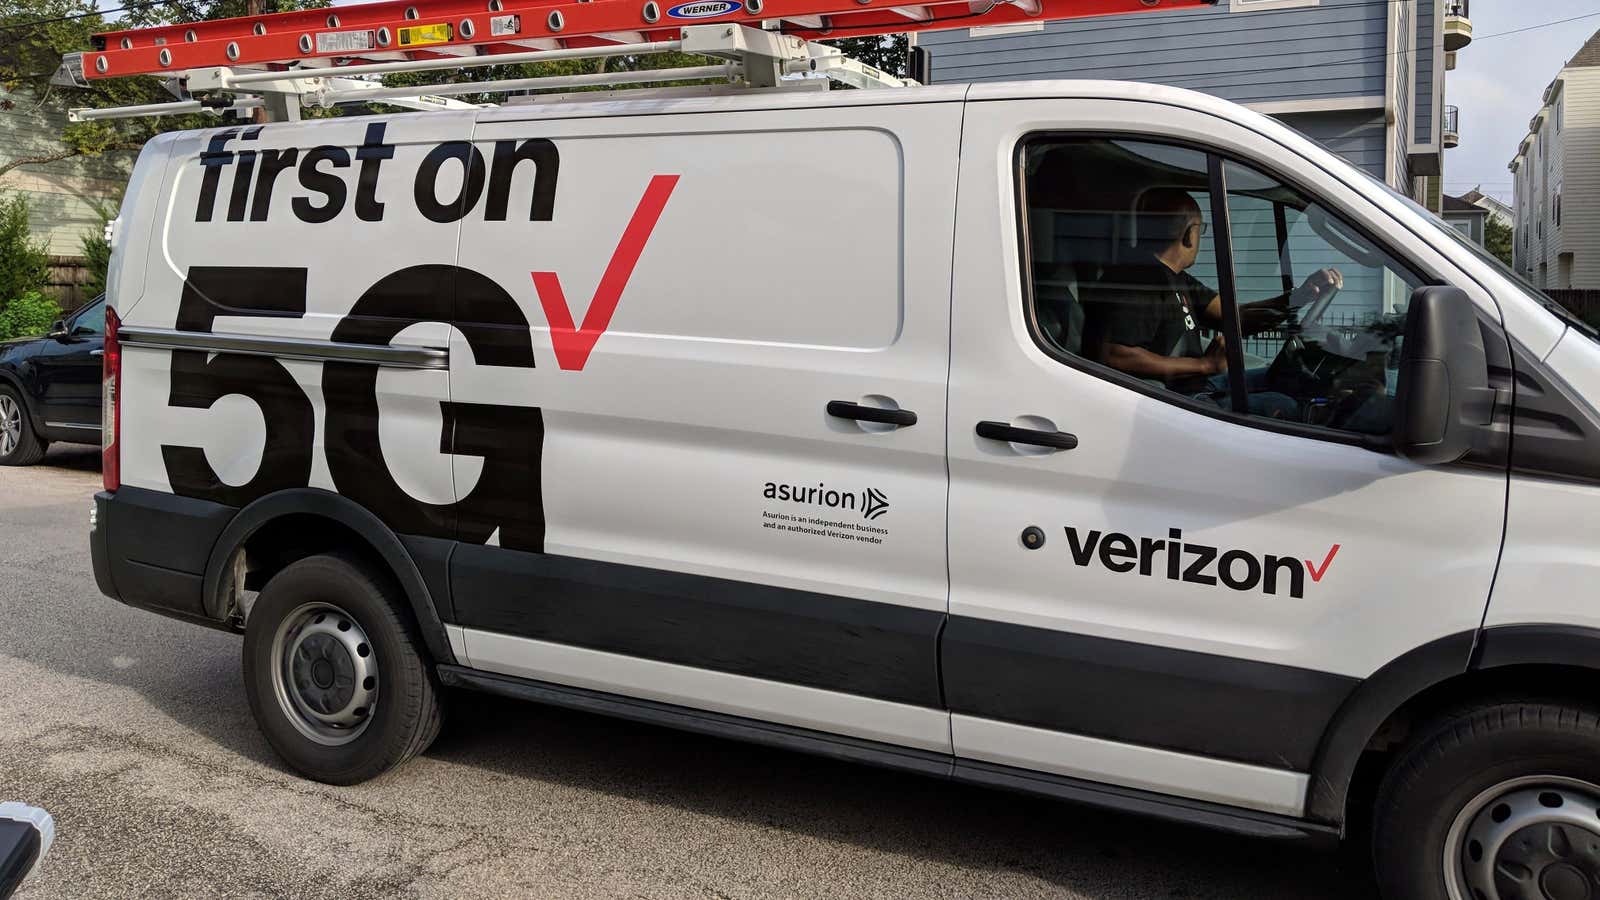 A Verizon truck on its way to install 5G broadband. Its 5G cell network will be rolled out next year.